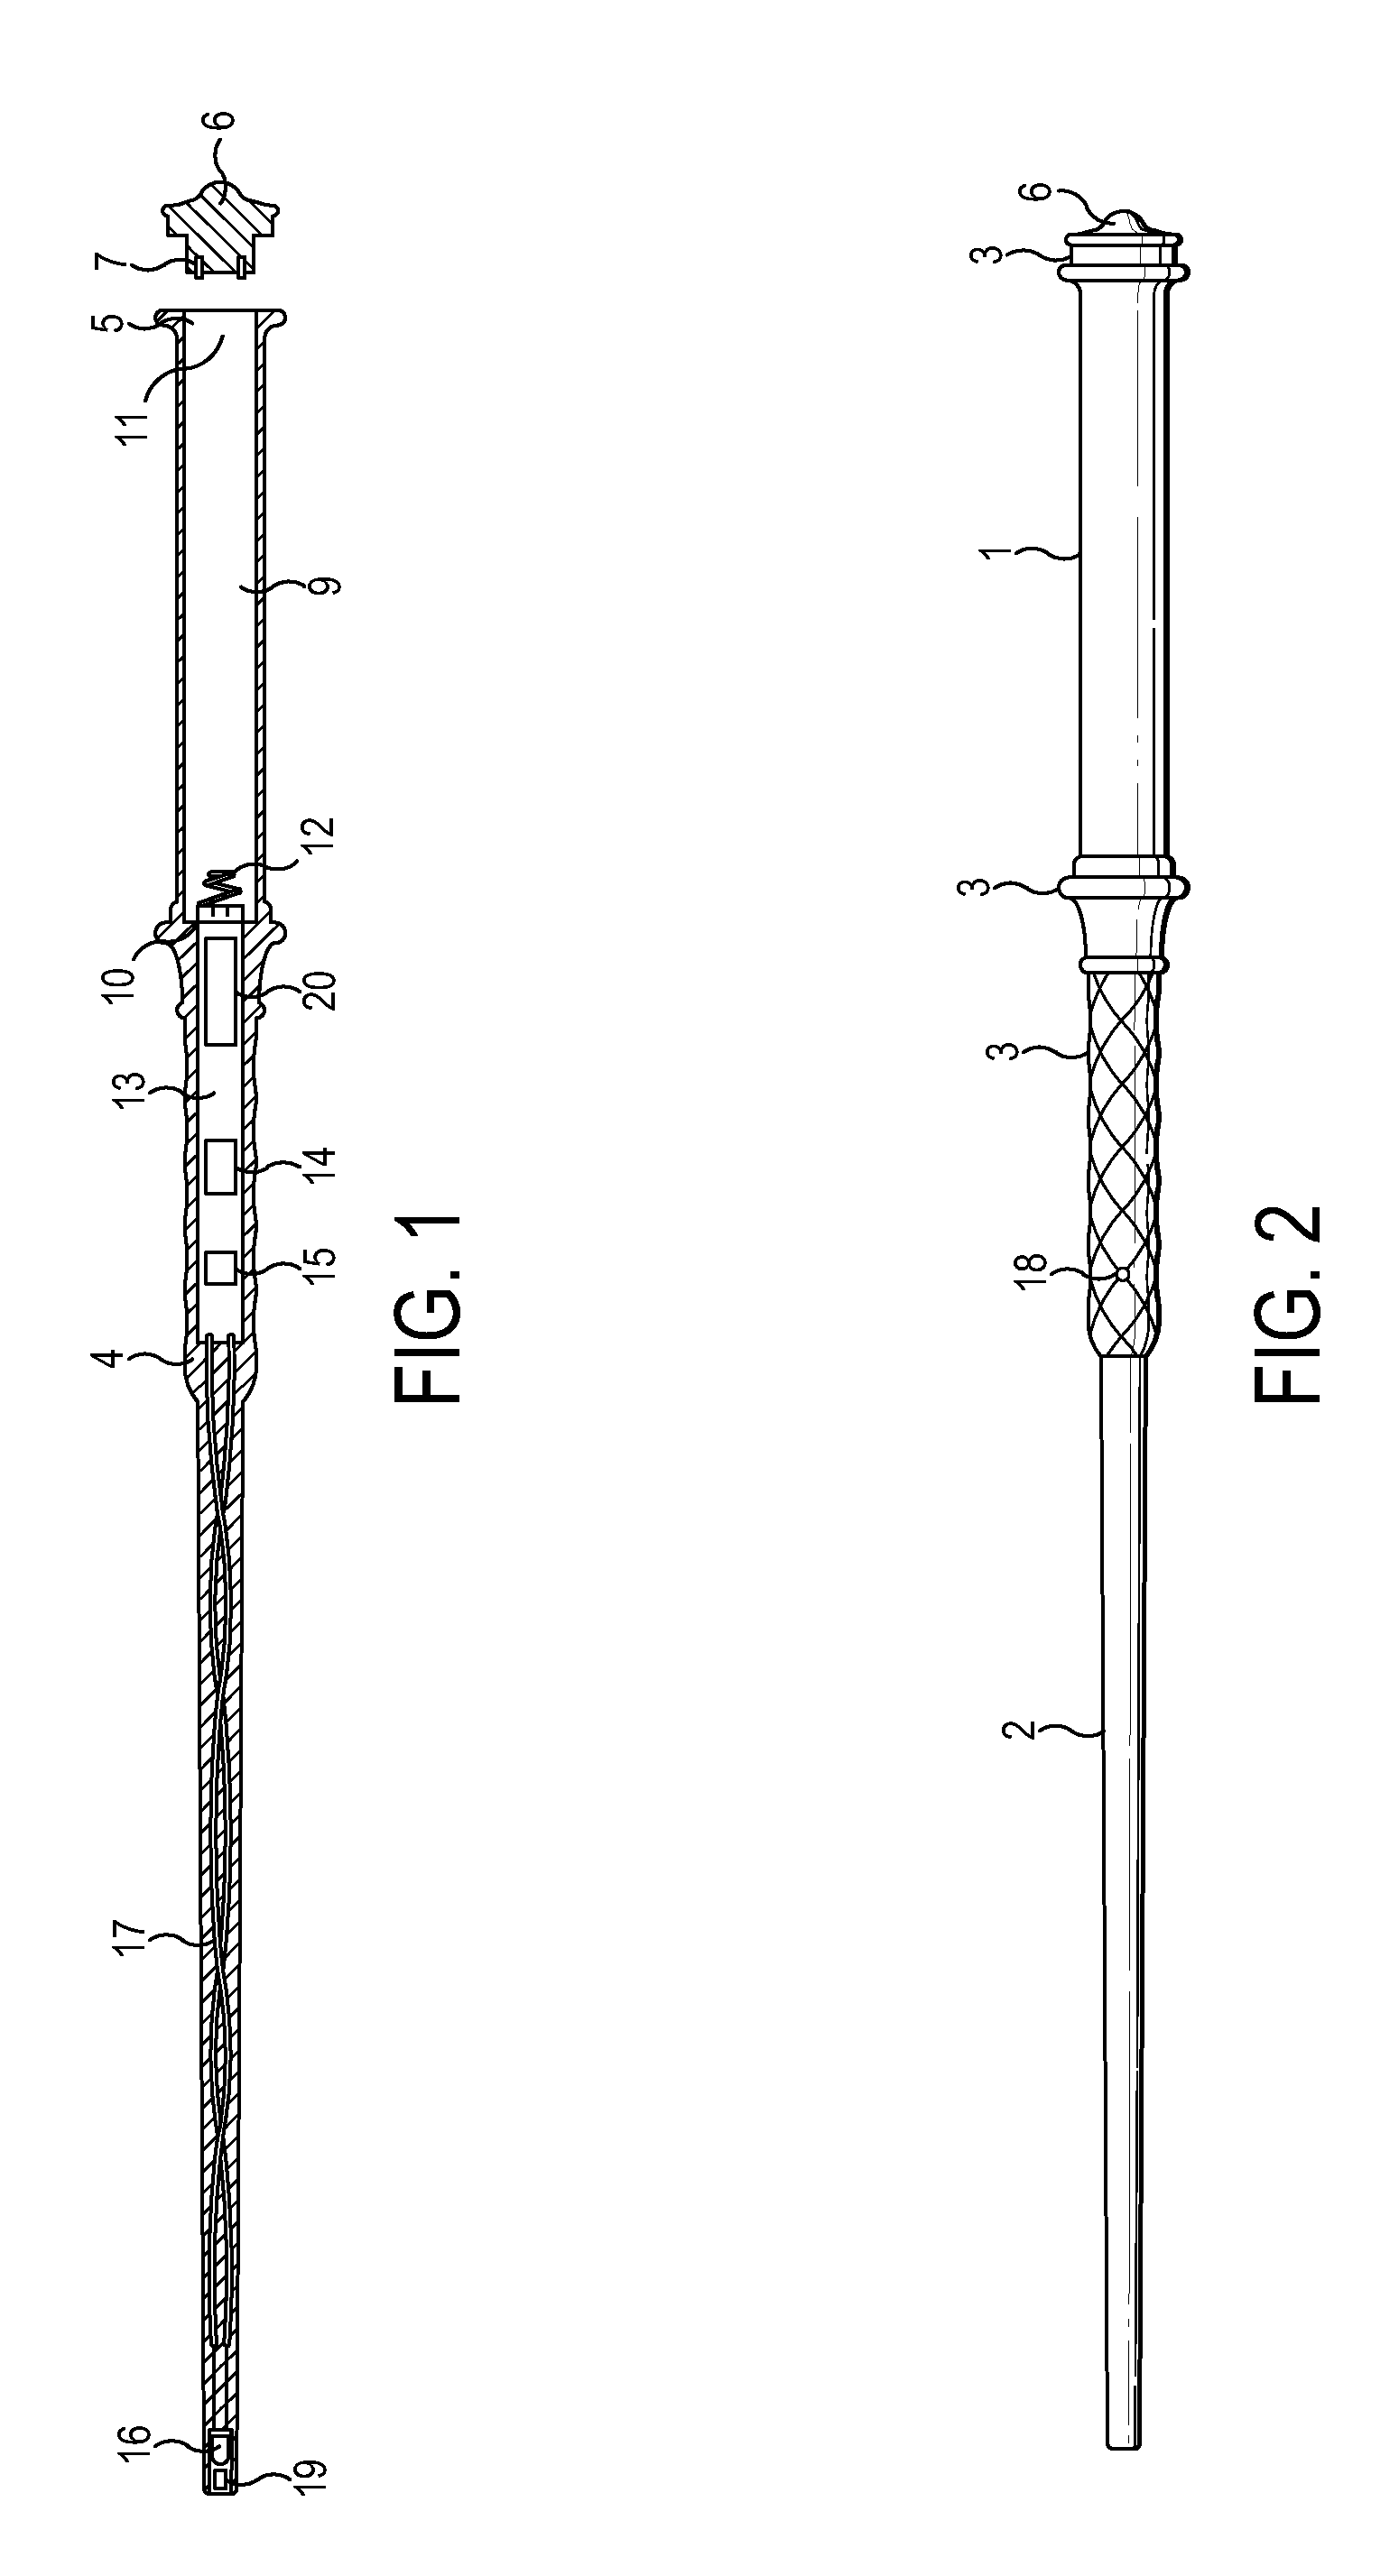 Remote control device, in particular a wand having motion detection